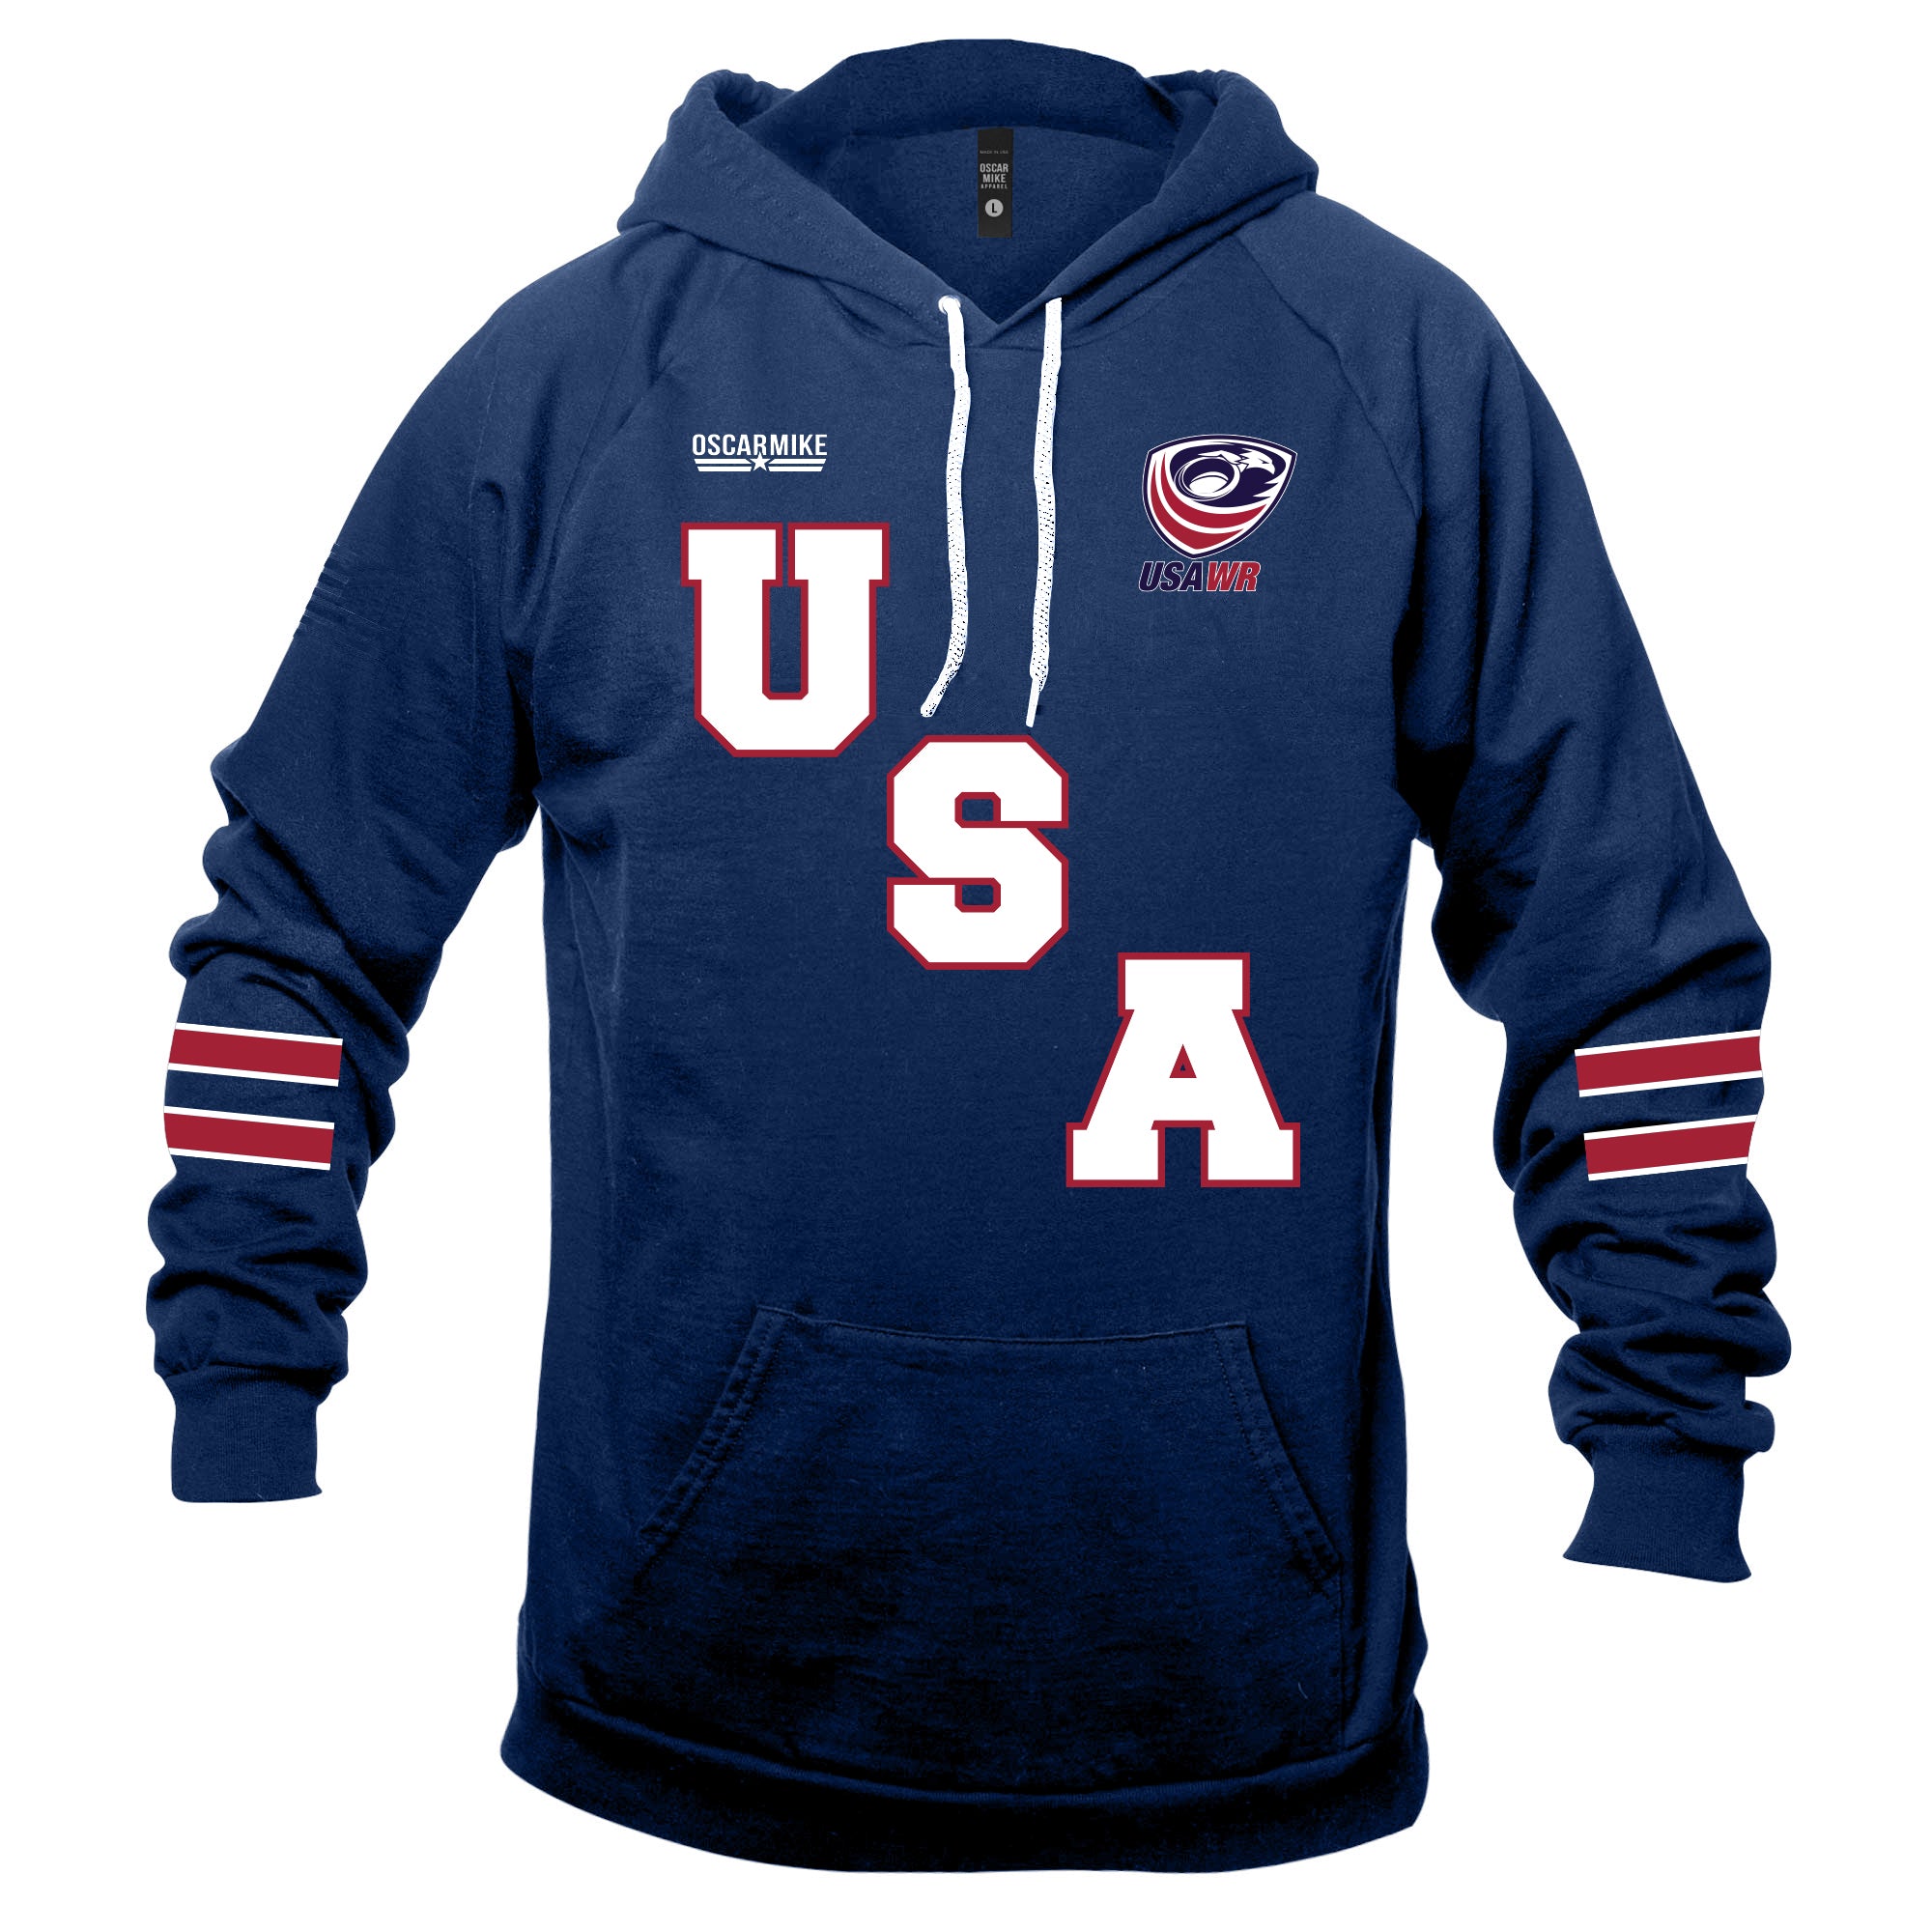 USAWR Pullover Hoodie